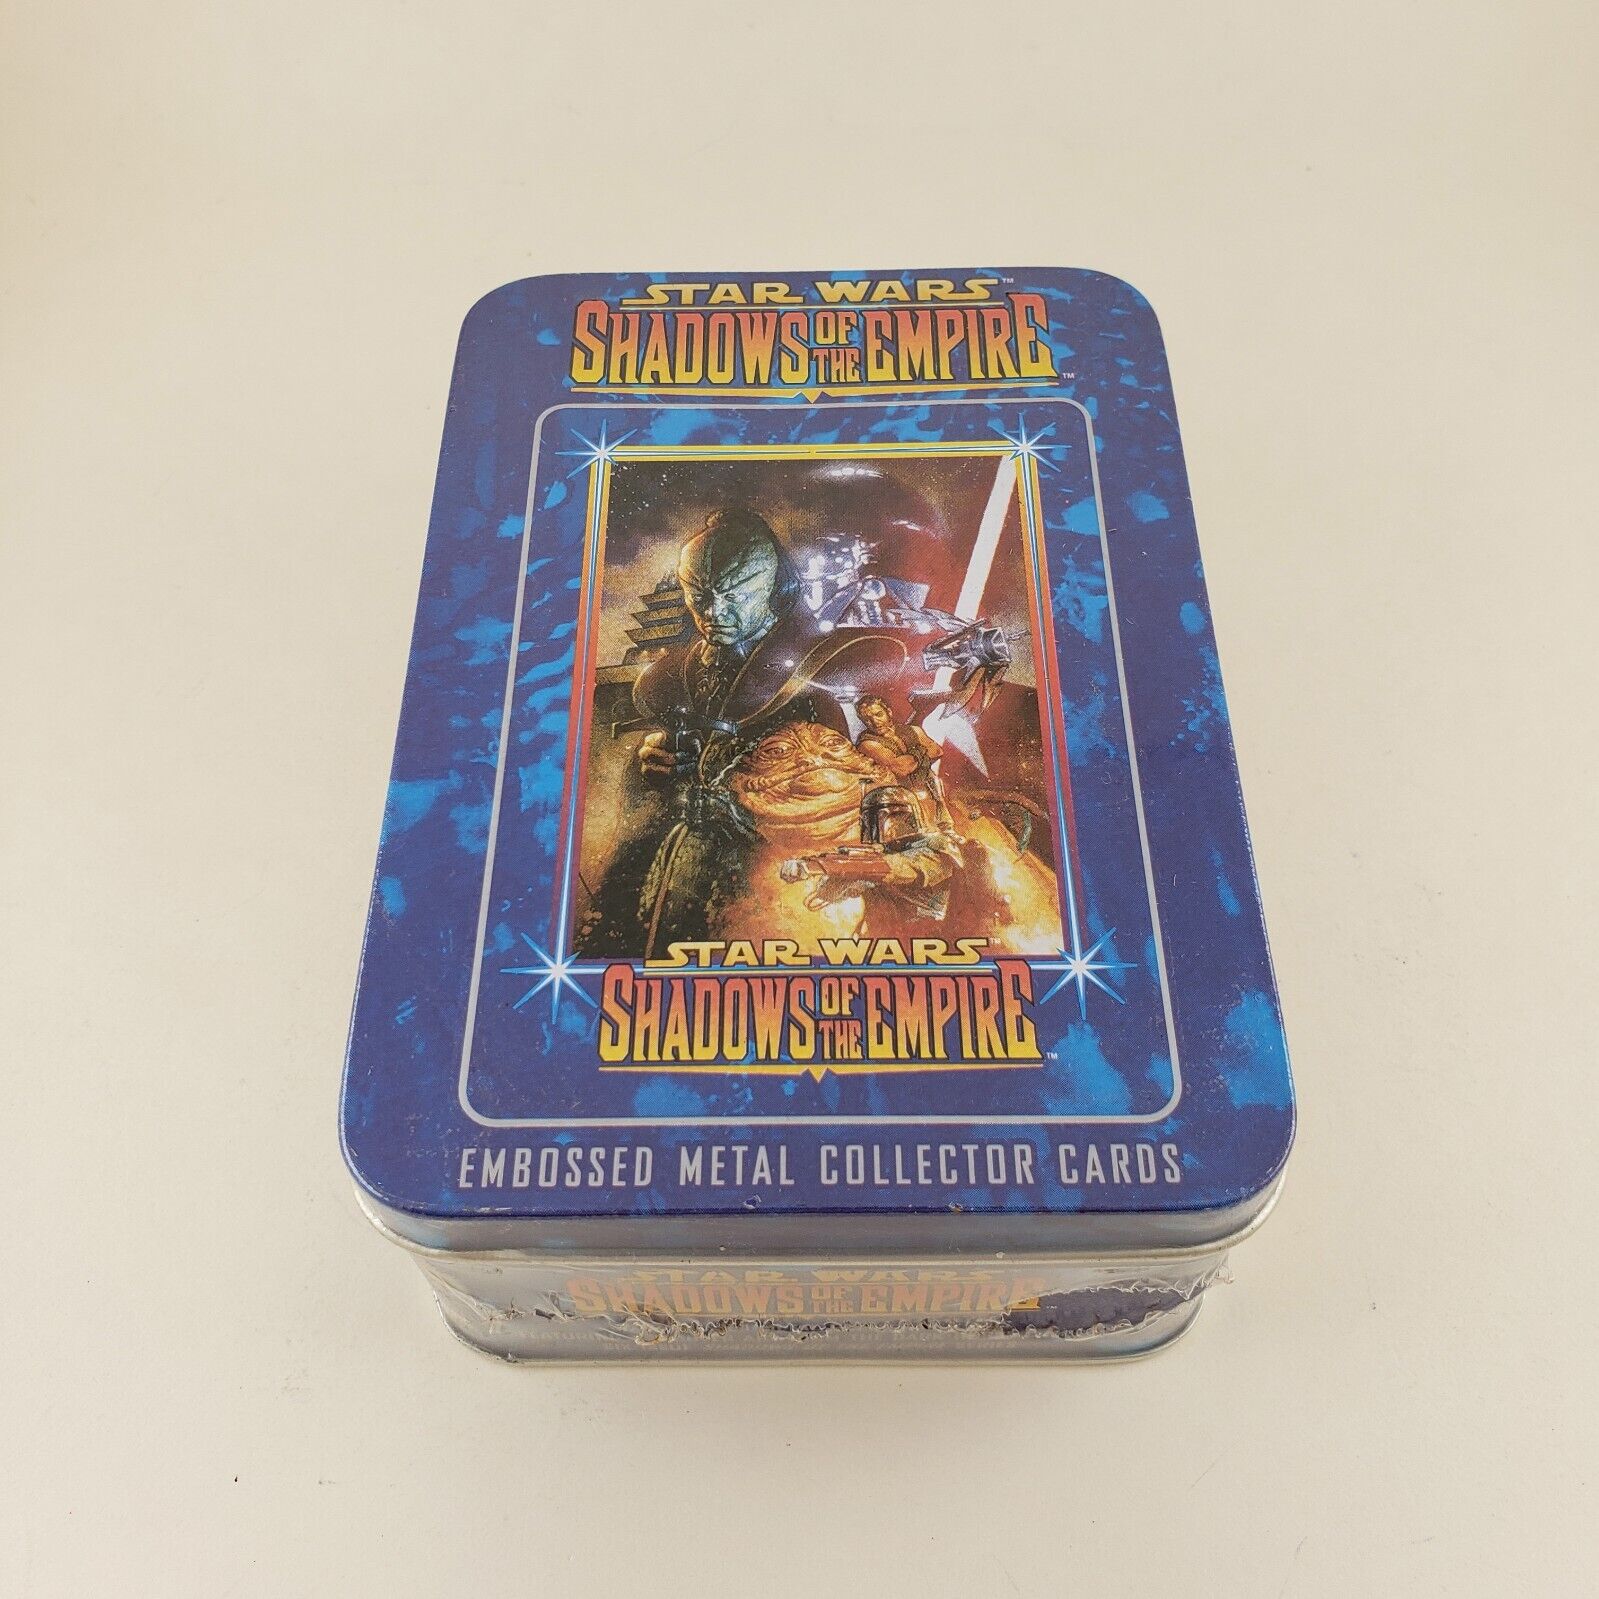 1997 Star Wars Shadows of the Empire Embossed Metal Collector Cards Tin Sealed